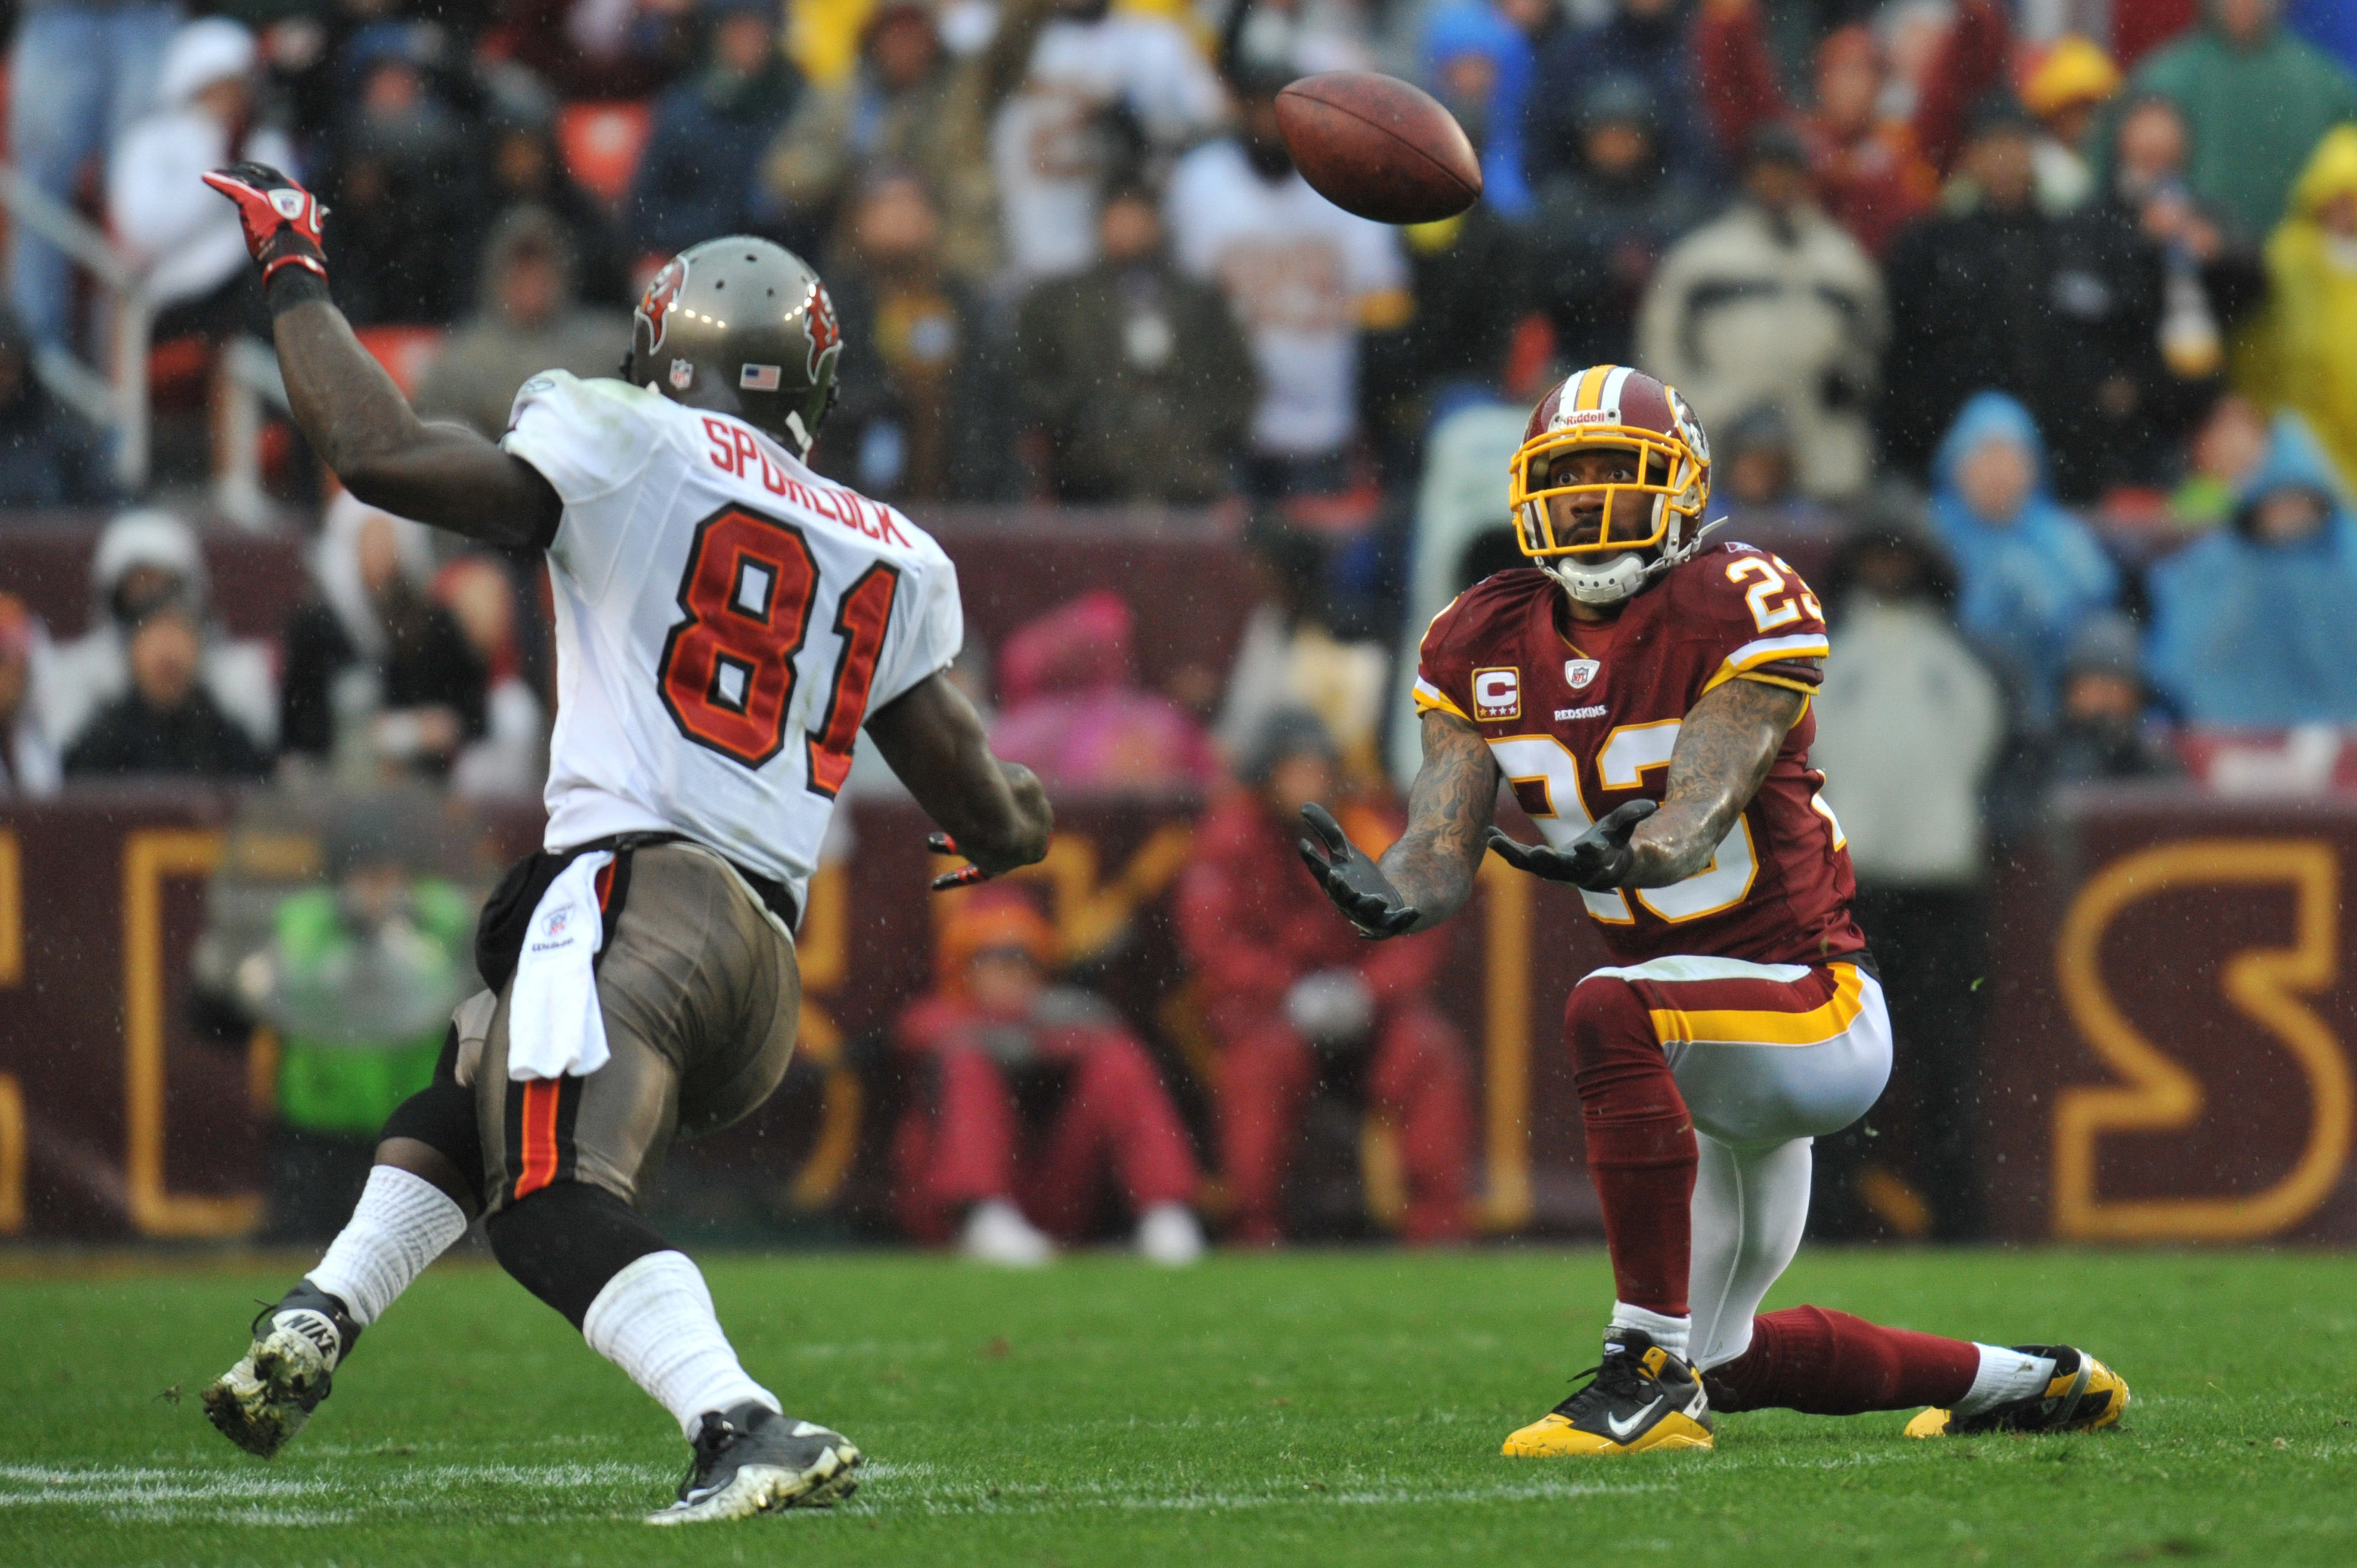 LANDOVER, MD - DECEMBER 12:  DeAngelo Hall #23 of the Washington Redskins tries for an interception against the Tampa Bay Buccaneers  at FedExField on December 12, 2010 in Landover, Maryland. The Buccaneers defeated the Redskins 17-16. (Photo by Larry Fre